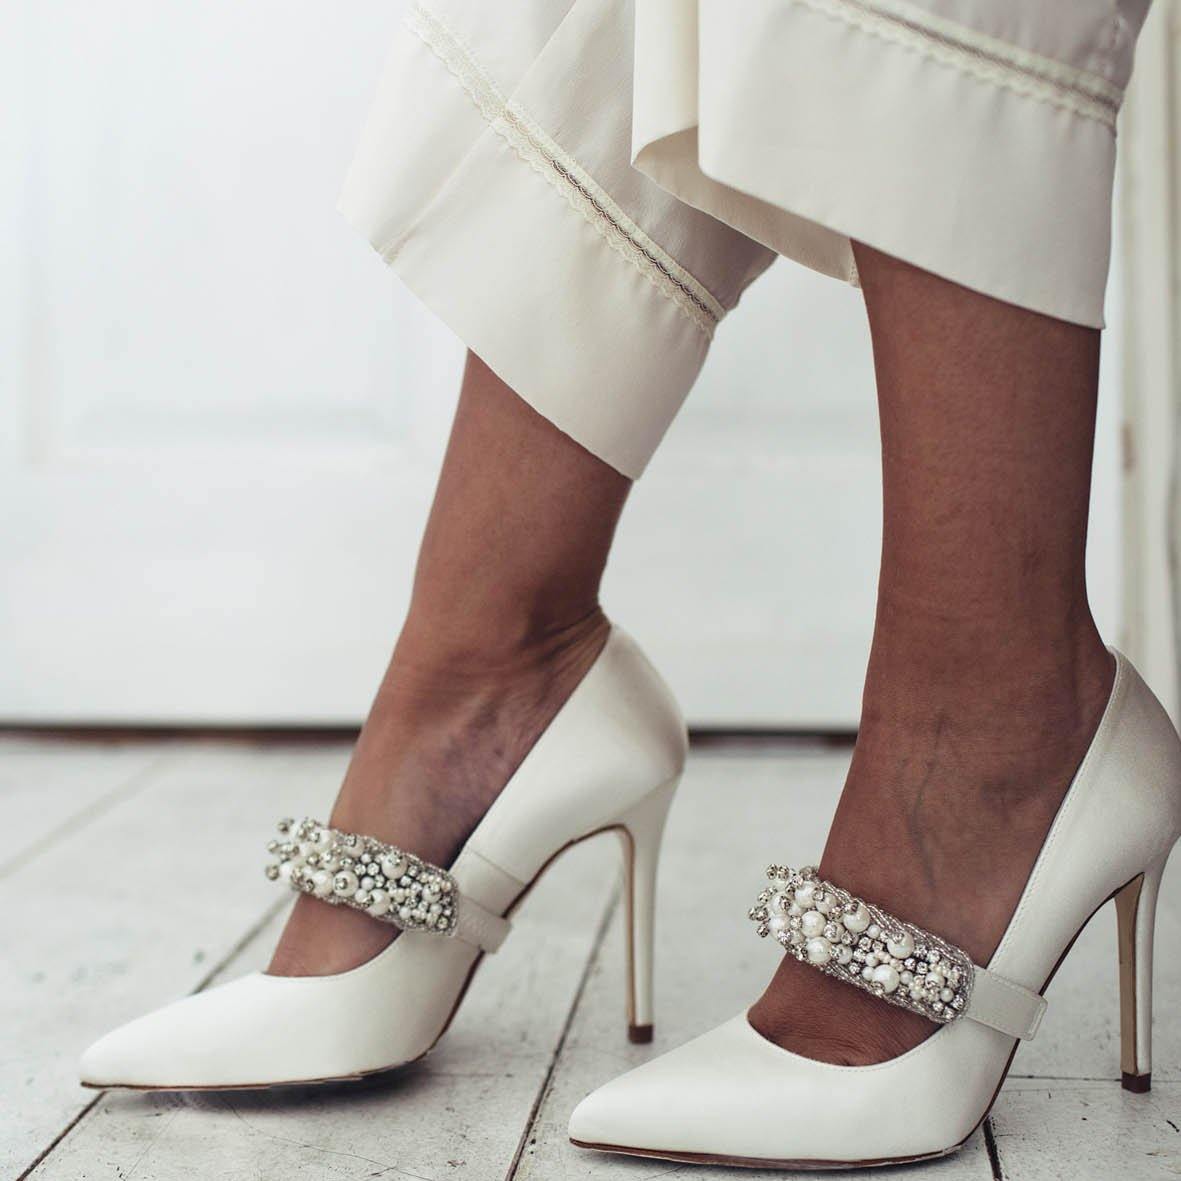 Incorporate Pearl Heels Into Your Spring Wardrobe - Pearl Trends for 2021 - Freya Rose